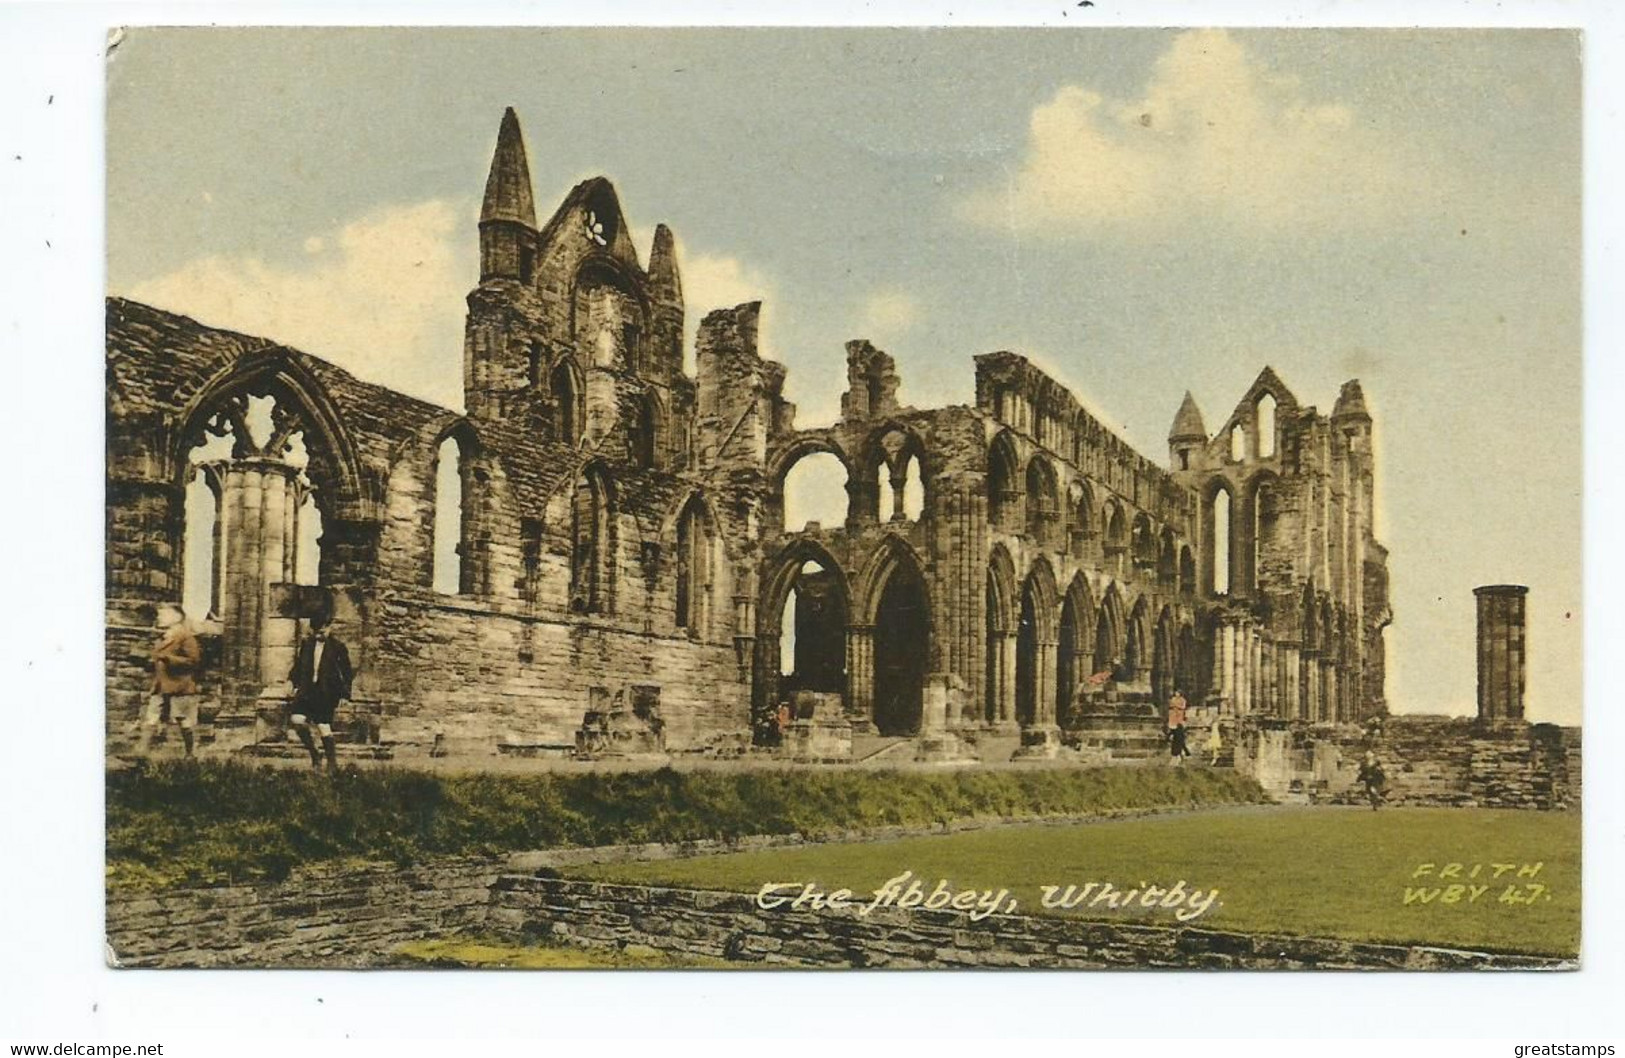 Yorkshire Whitby Abbey Frith's Posted 1959 - Whitby